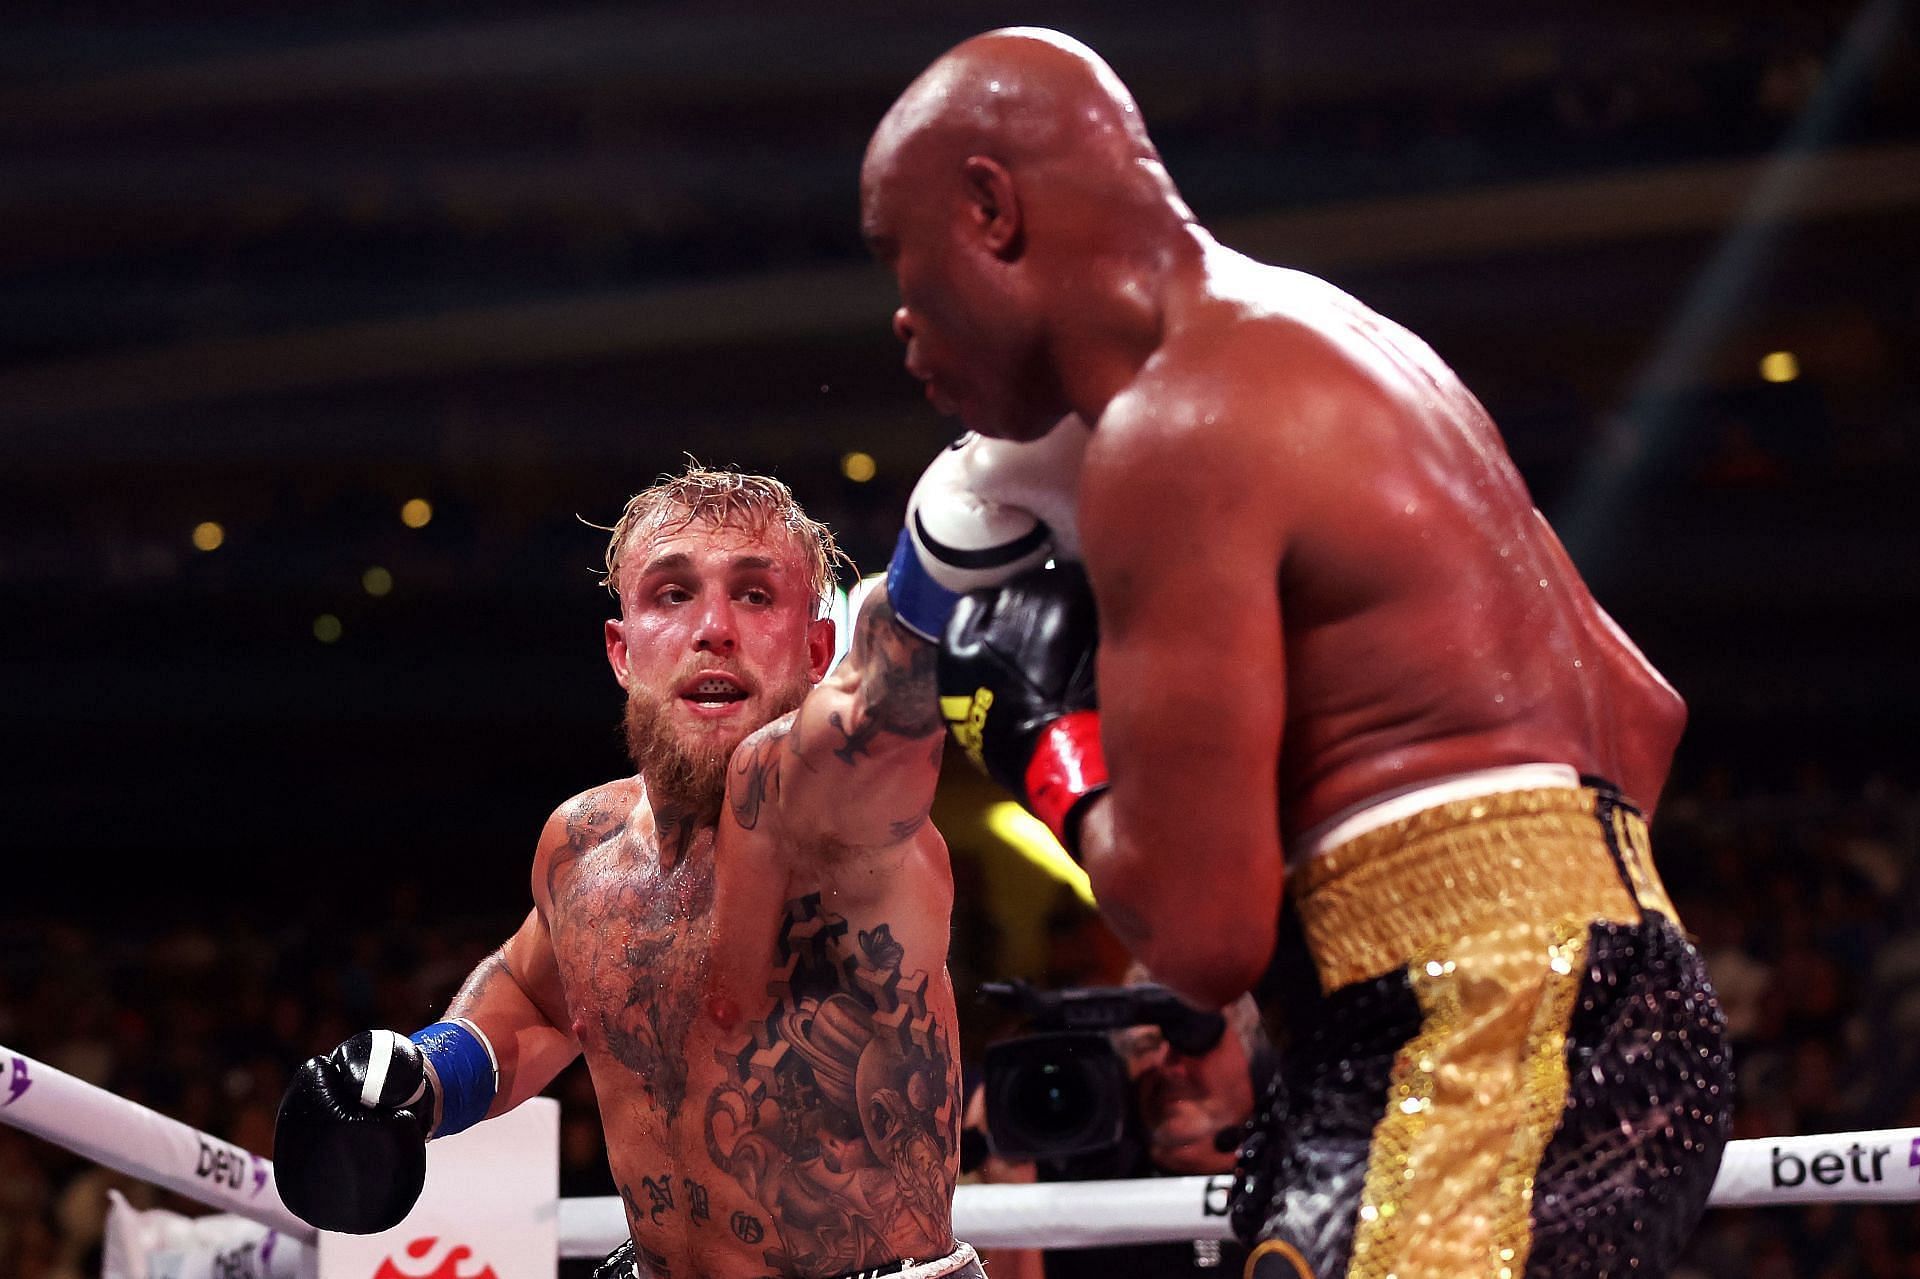 Super impressed with Jake Paul&quot;- Deji, Ryan Garcia and more react as Jake  Paul beats Anderson Silva by unanimous decision